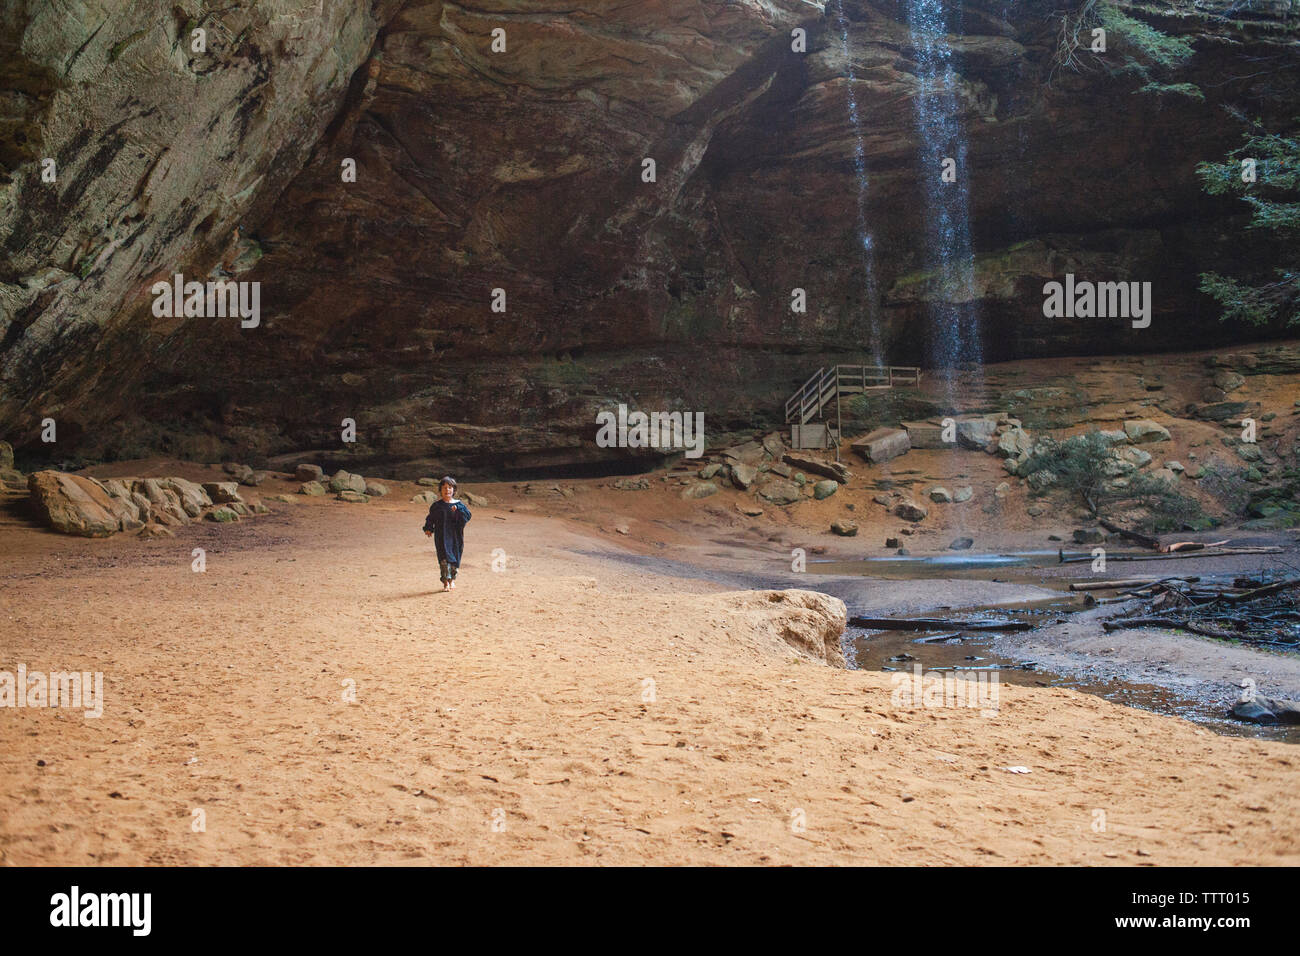 A small child in the distance standing in a gorge with waterfall Stock Photo